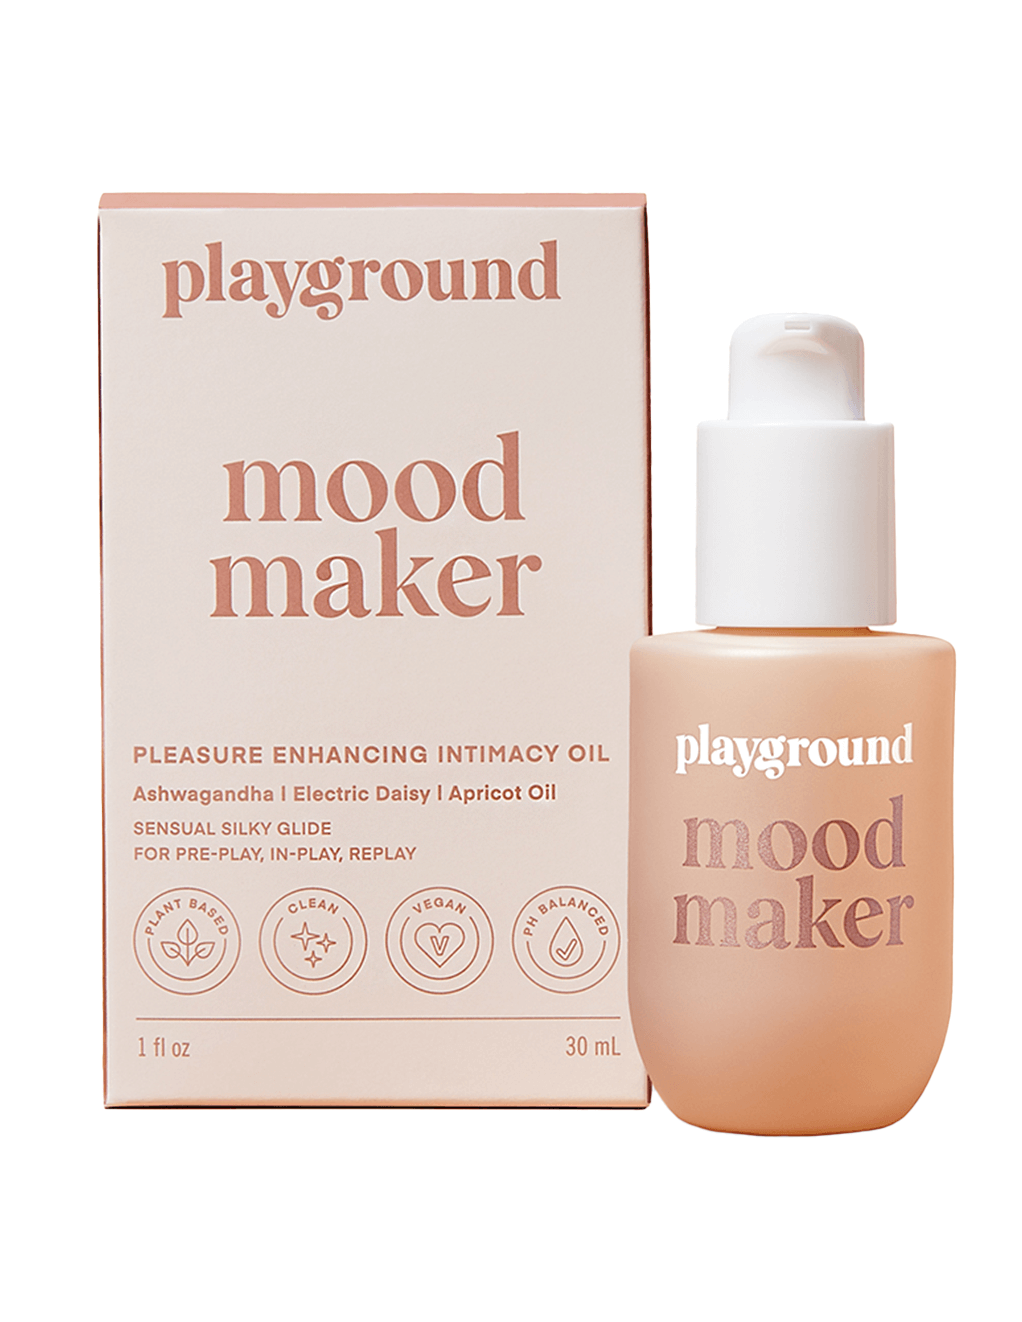 Playground Mood Maker Intimacy Oil - Product w/Box